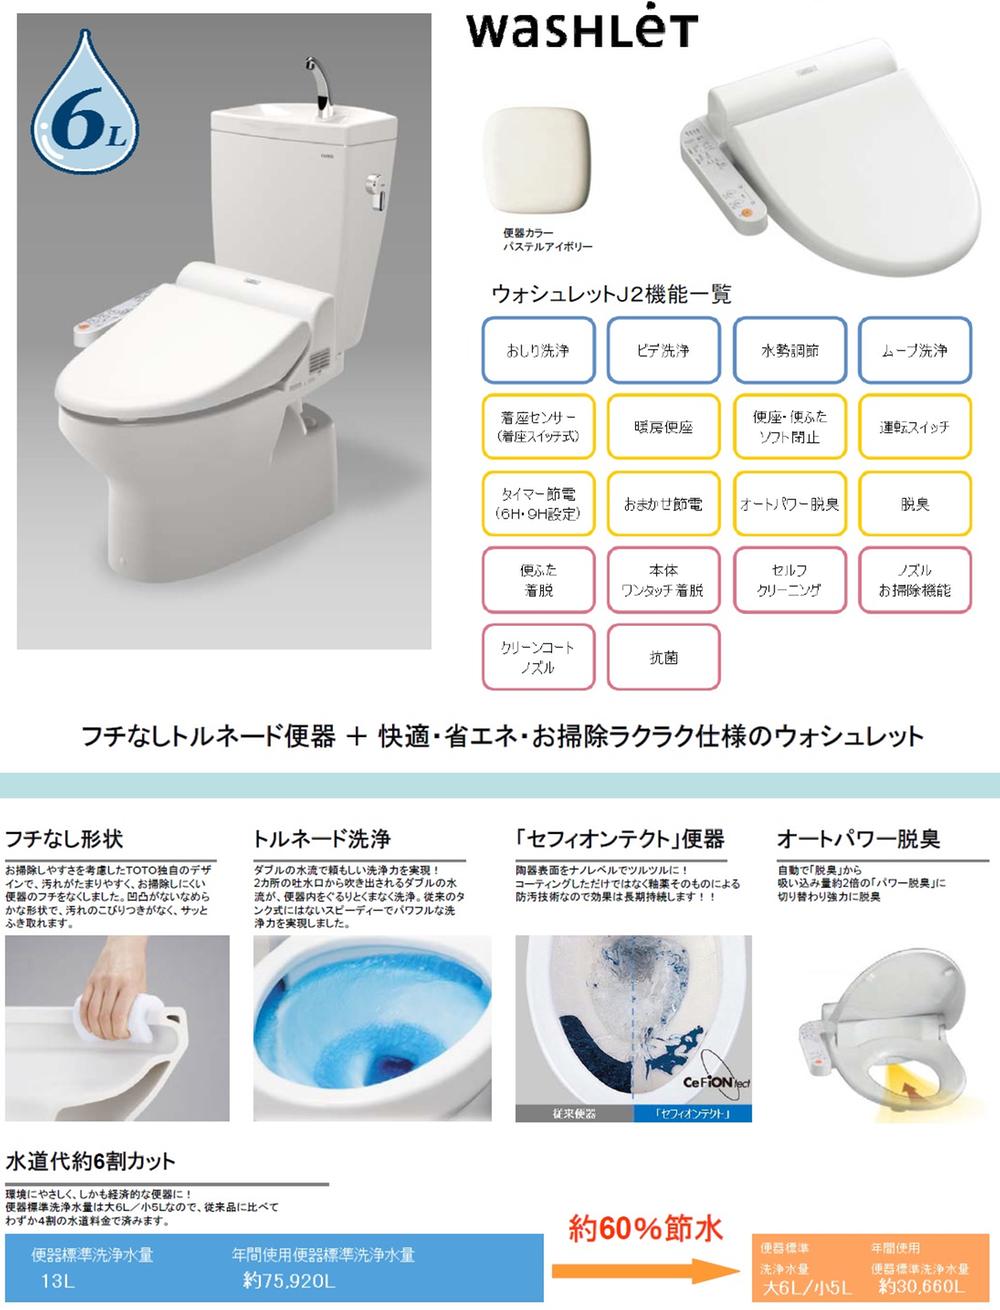 Other Equipment.  ・ Borderless shape in consideration of the cleaning ease ・ Tornado cleaning to wash all over the inside of the toilet bowl in the double of water flow ・ The pottery surface was coated in slippery at the nano-level "Sefi on Detect" toilet bowl ・ Automatically from "deodorizing", Deodorizing in cooperation switches to suction weight of about 2 times the "power deodorizing"